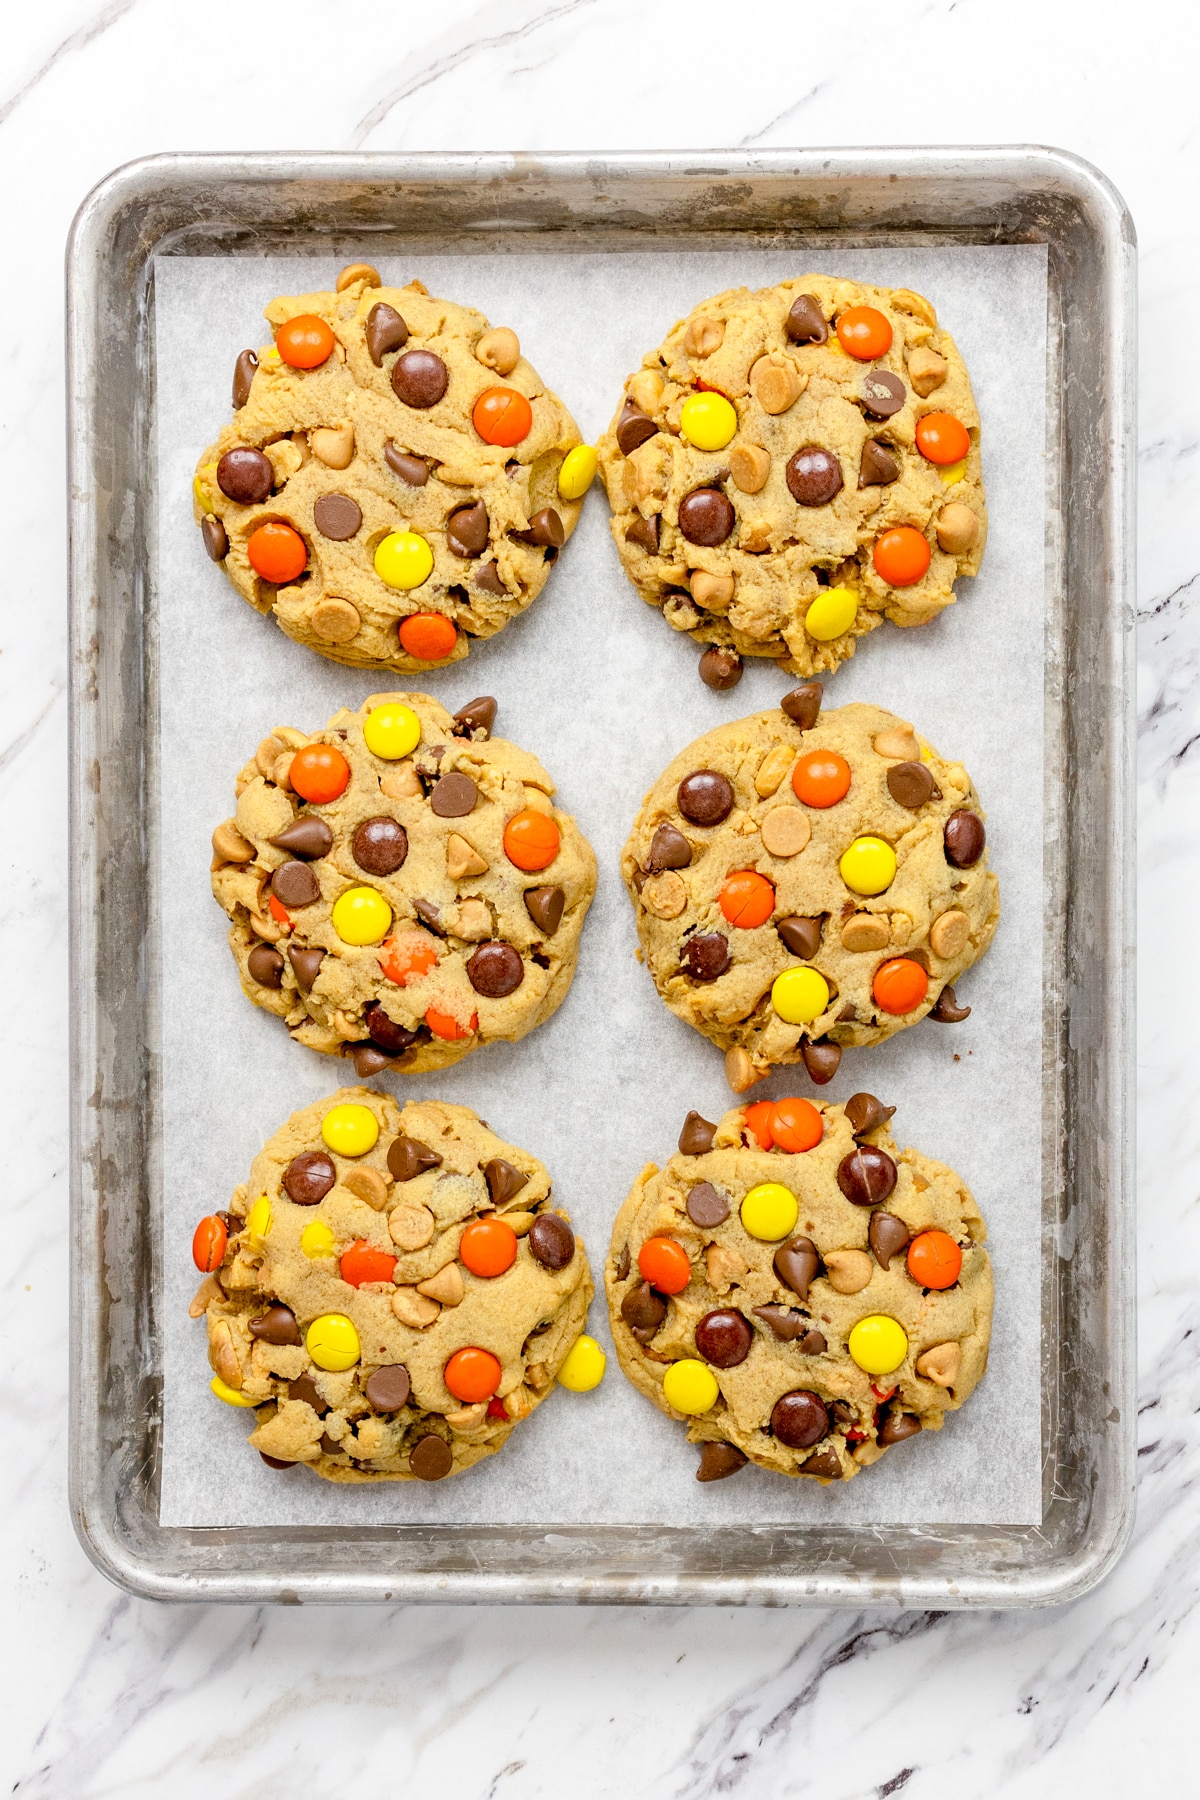 Top view of large reeces pieces cookies on a baking tray.